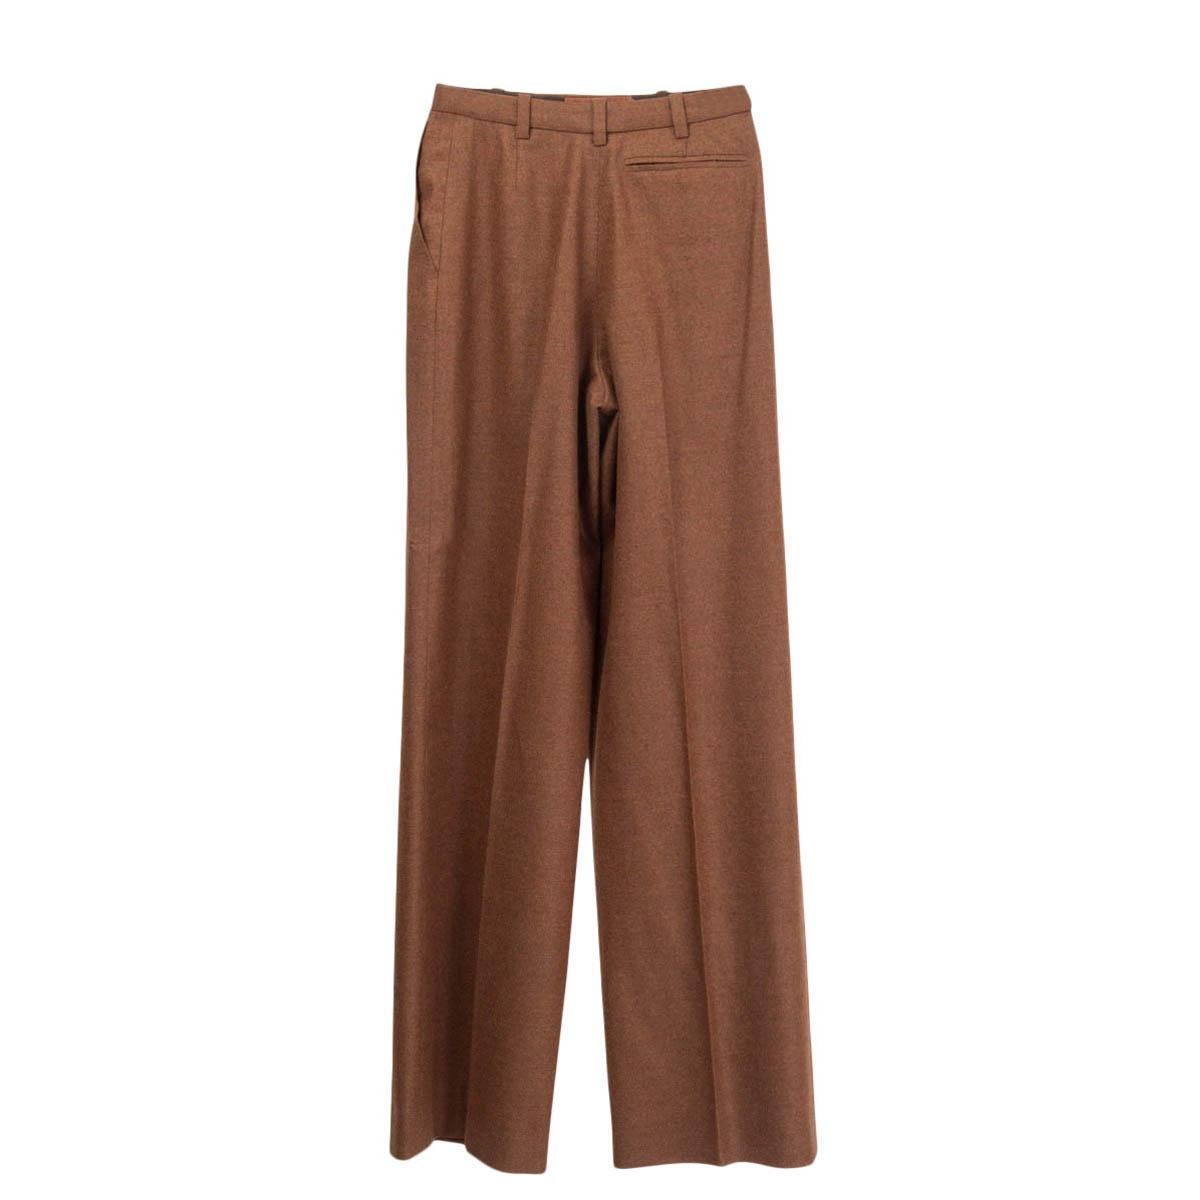 100% authentic Hermès high waisted pants in tan virgin wool (100%). Comes with two slit pockets on the side and two sewn shut slit pockets on the back. Opens with a concealed button, hook and zipper on the front. Have been worn and are in excellent